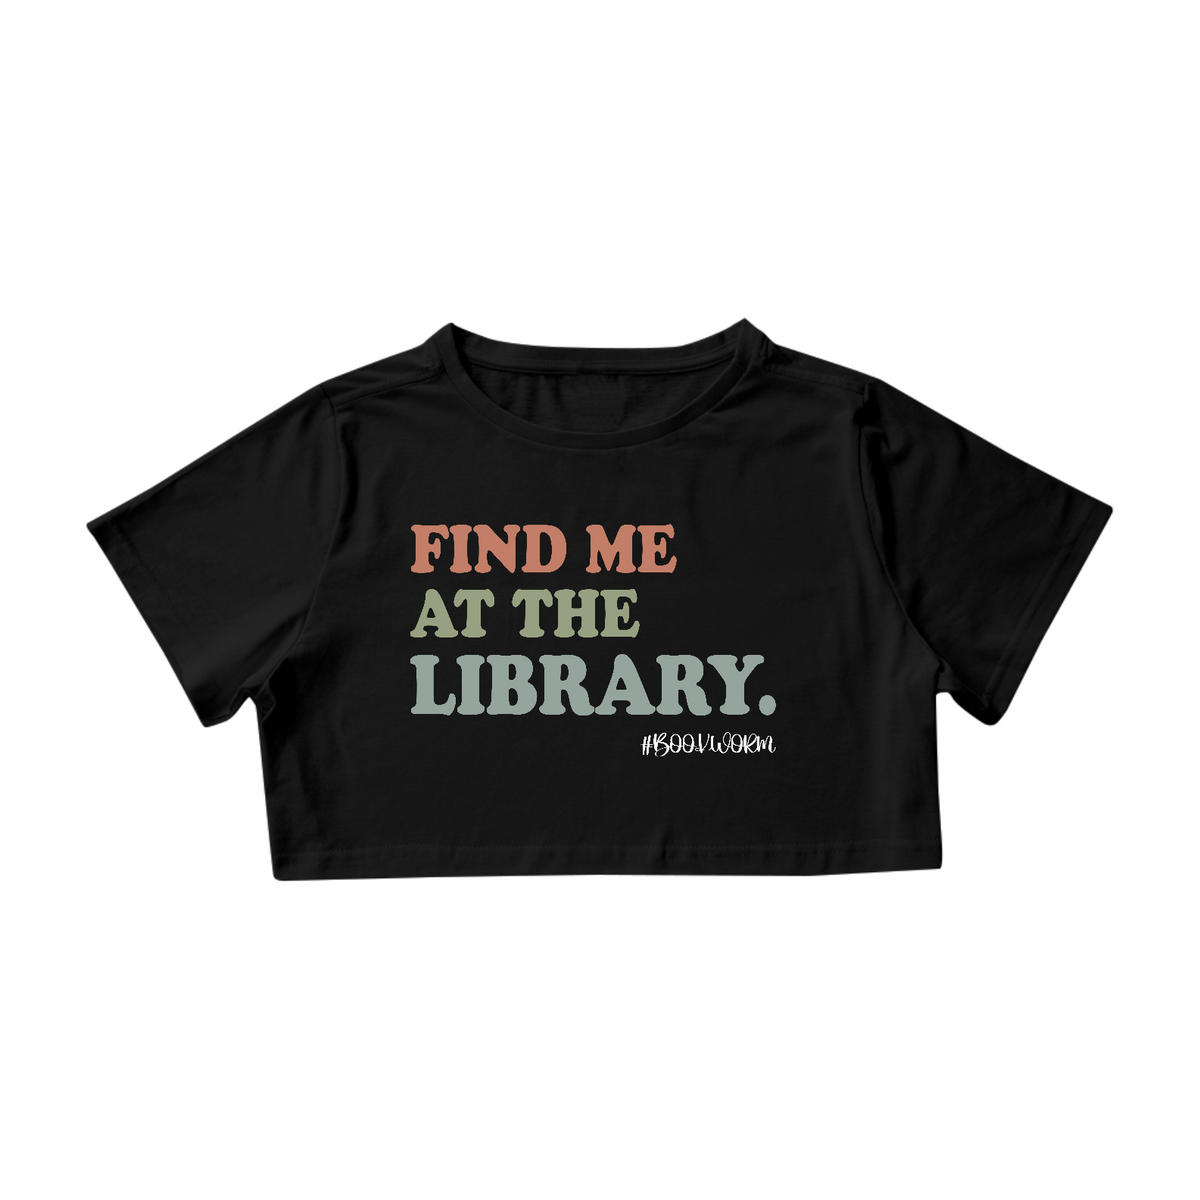 Nome do produto: Cropped Find Me At The Library